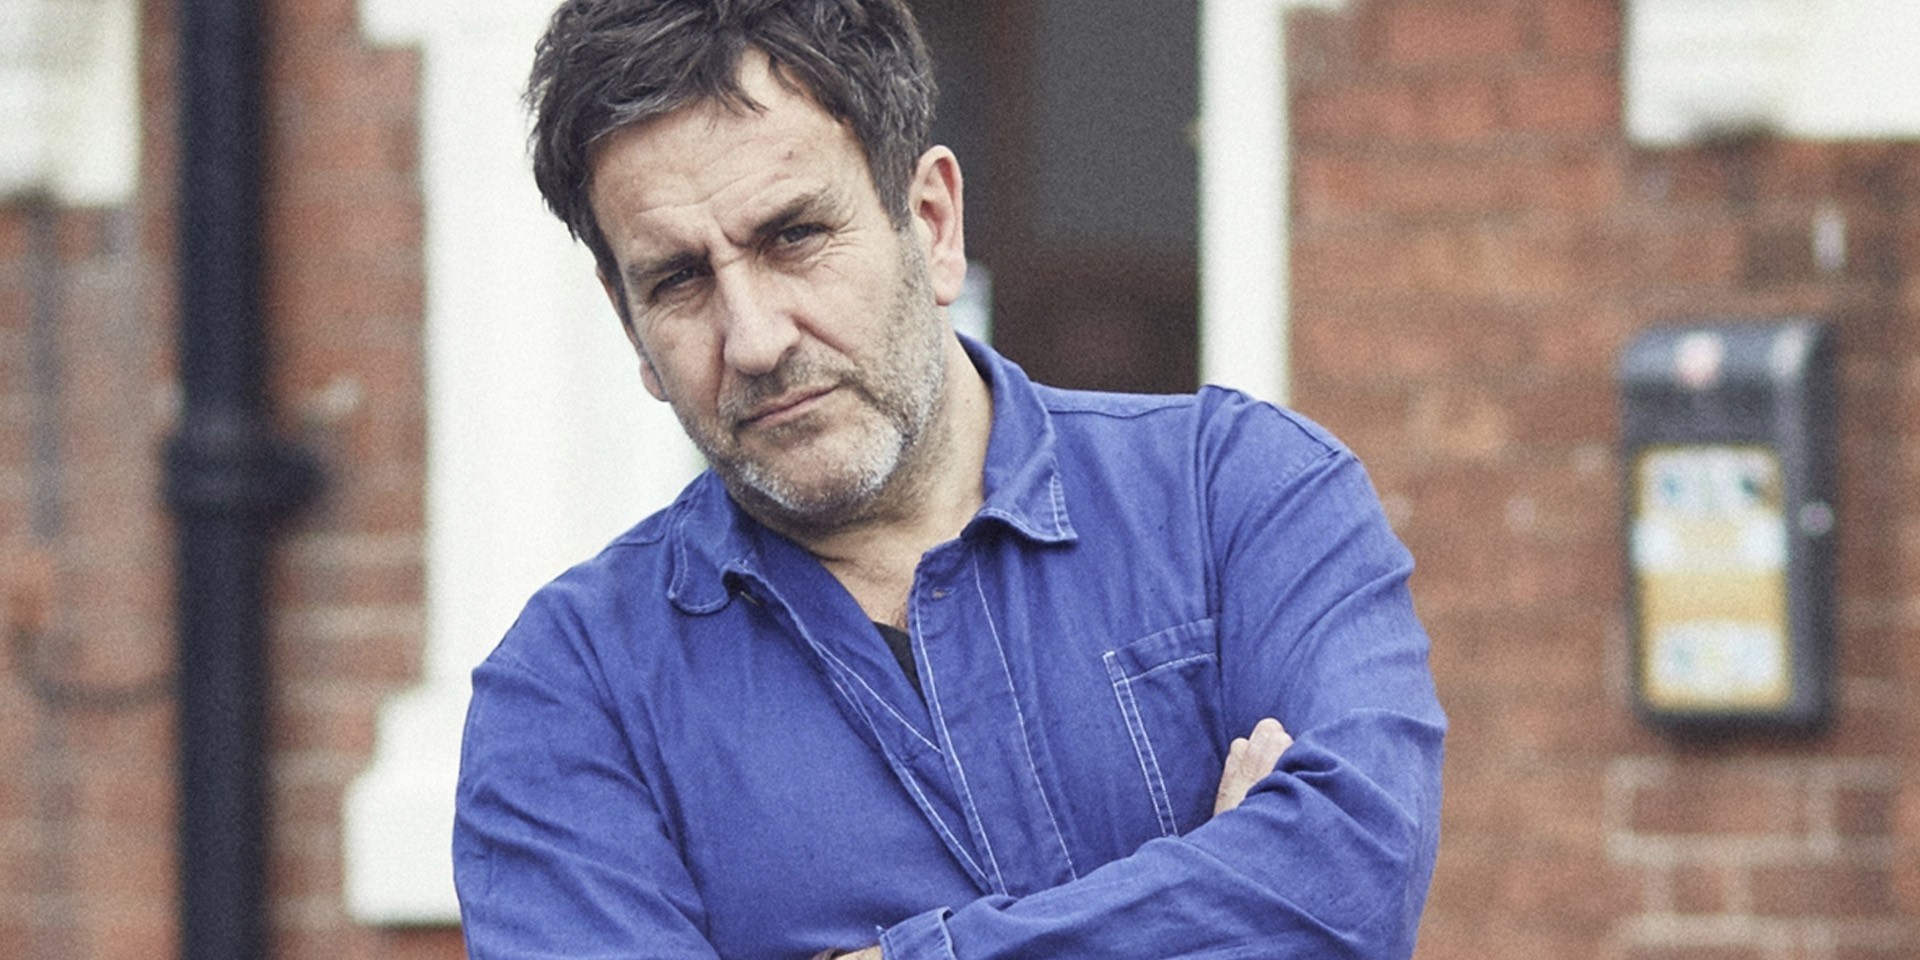 Terry Hall to perform live DJ set in Manila for Fred Perry Philippines' 10th anniversary